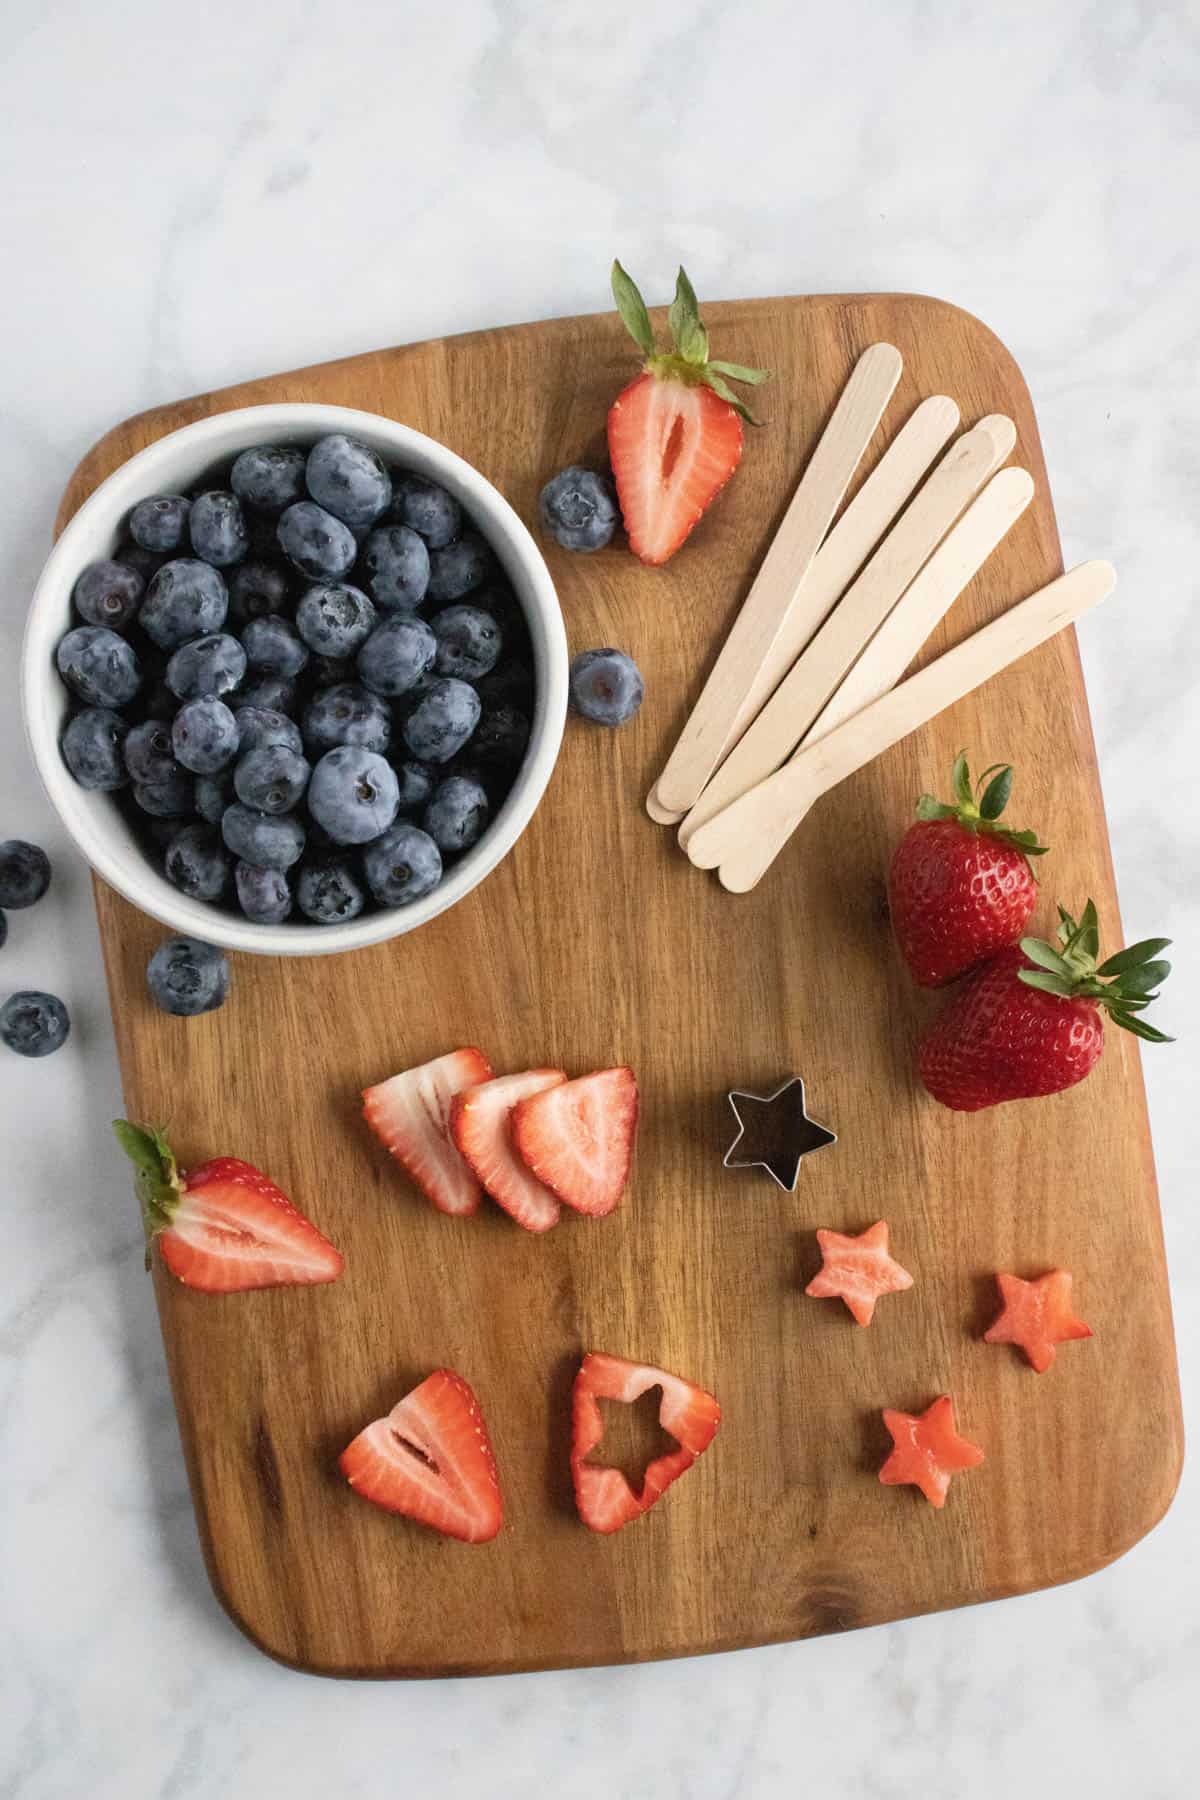 Cutting out stars from strawberry slices with a small star cookie cutter on a cutting board with popsicle sticks and blueberries in a bowl.